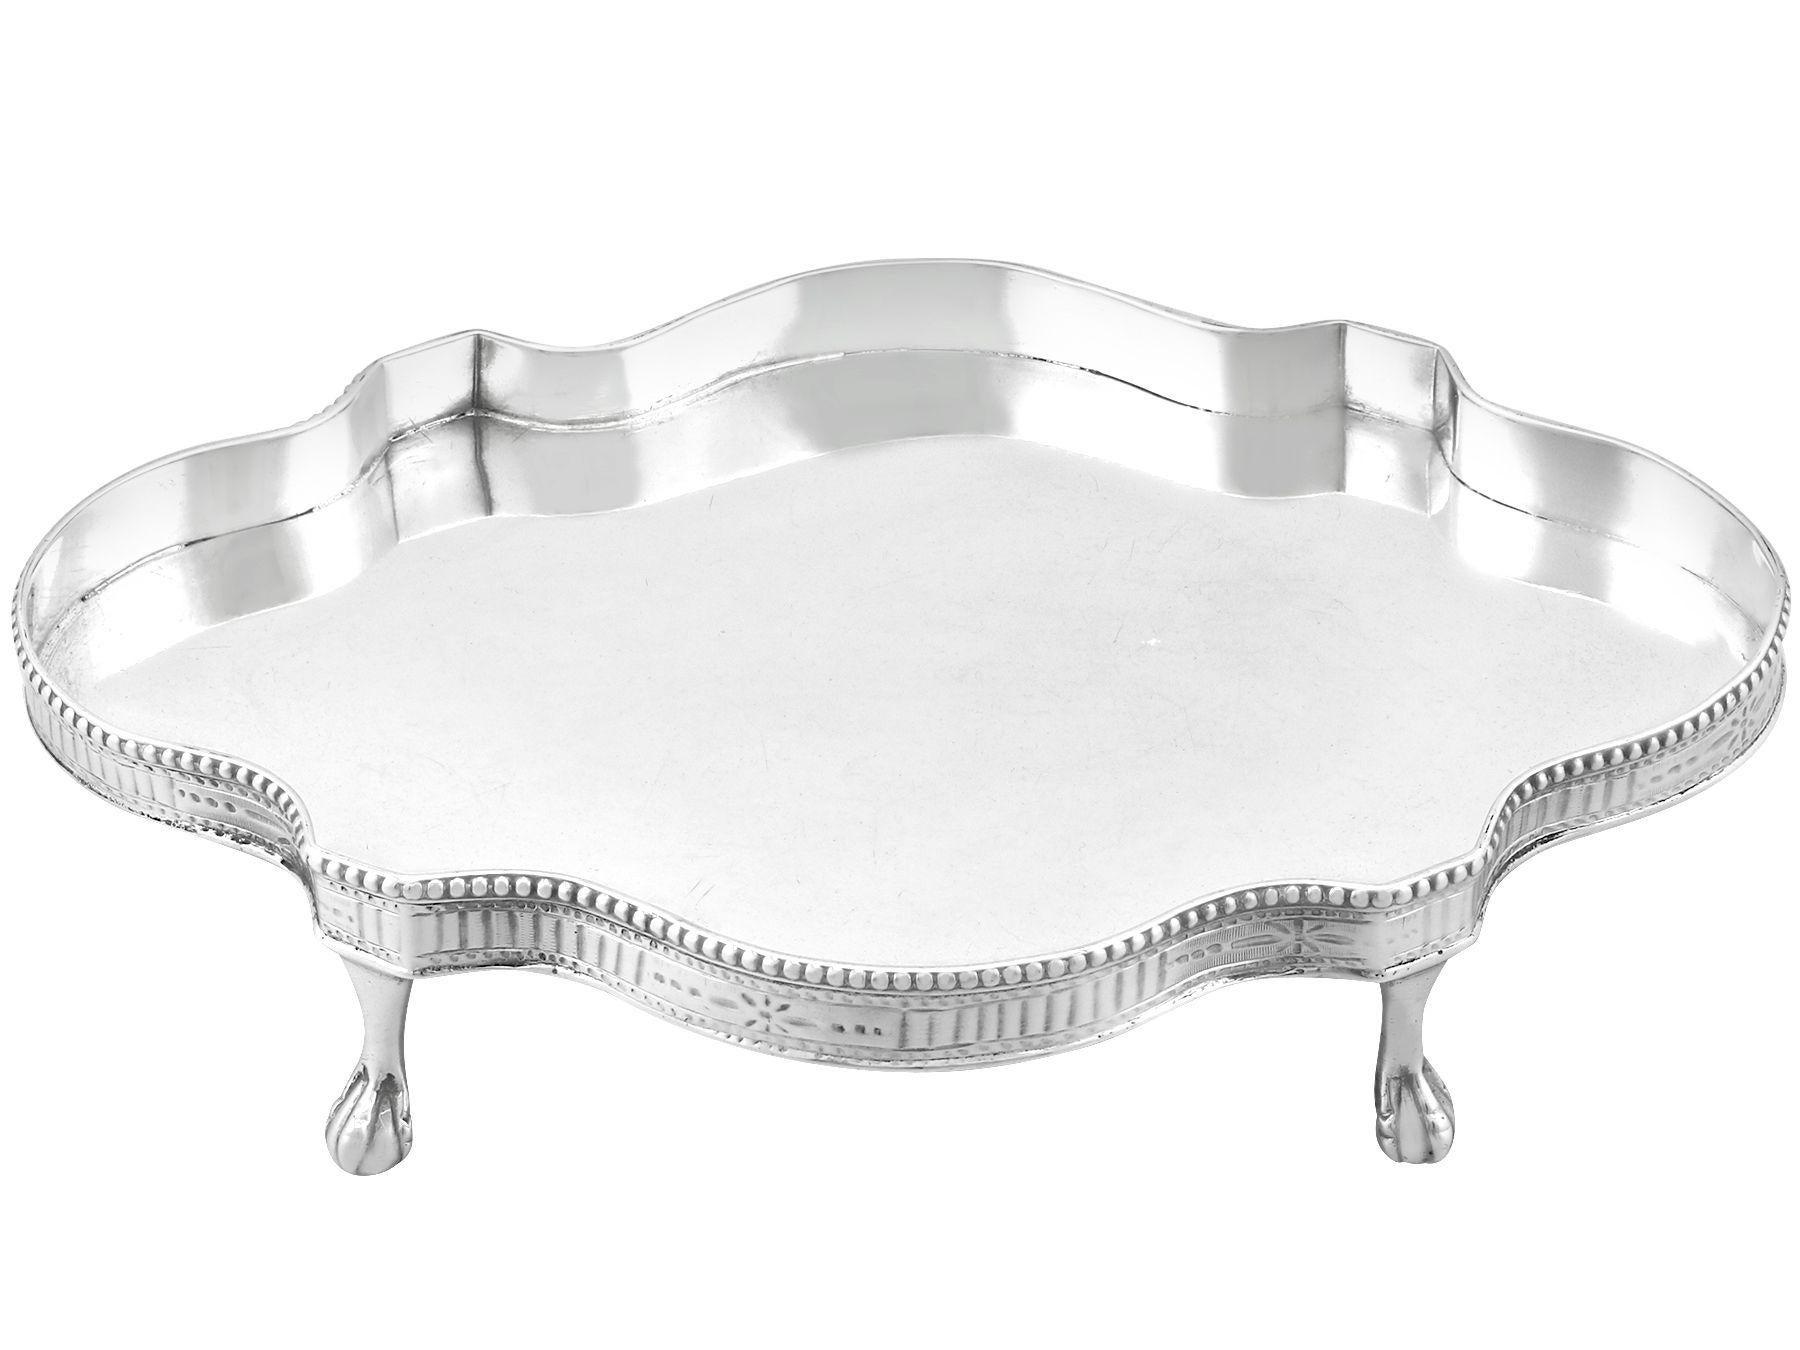 A fine and impressive antique Georgian Newcastle sterling silver teapot stand made by John Langlands I & John Robertson I; an addition to our ornamental silverware collection

This fine and impressive antique Georgian sterling silver teapot stand